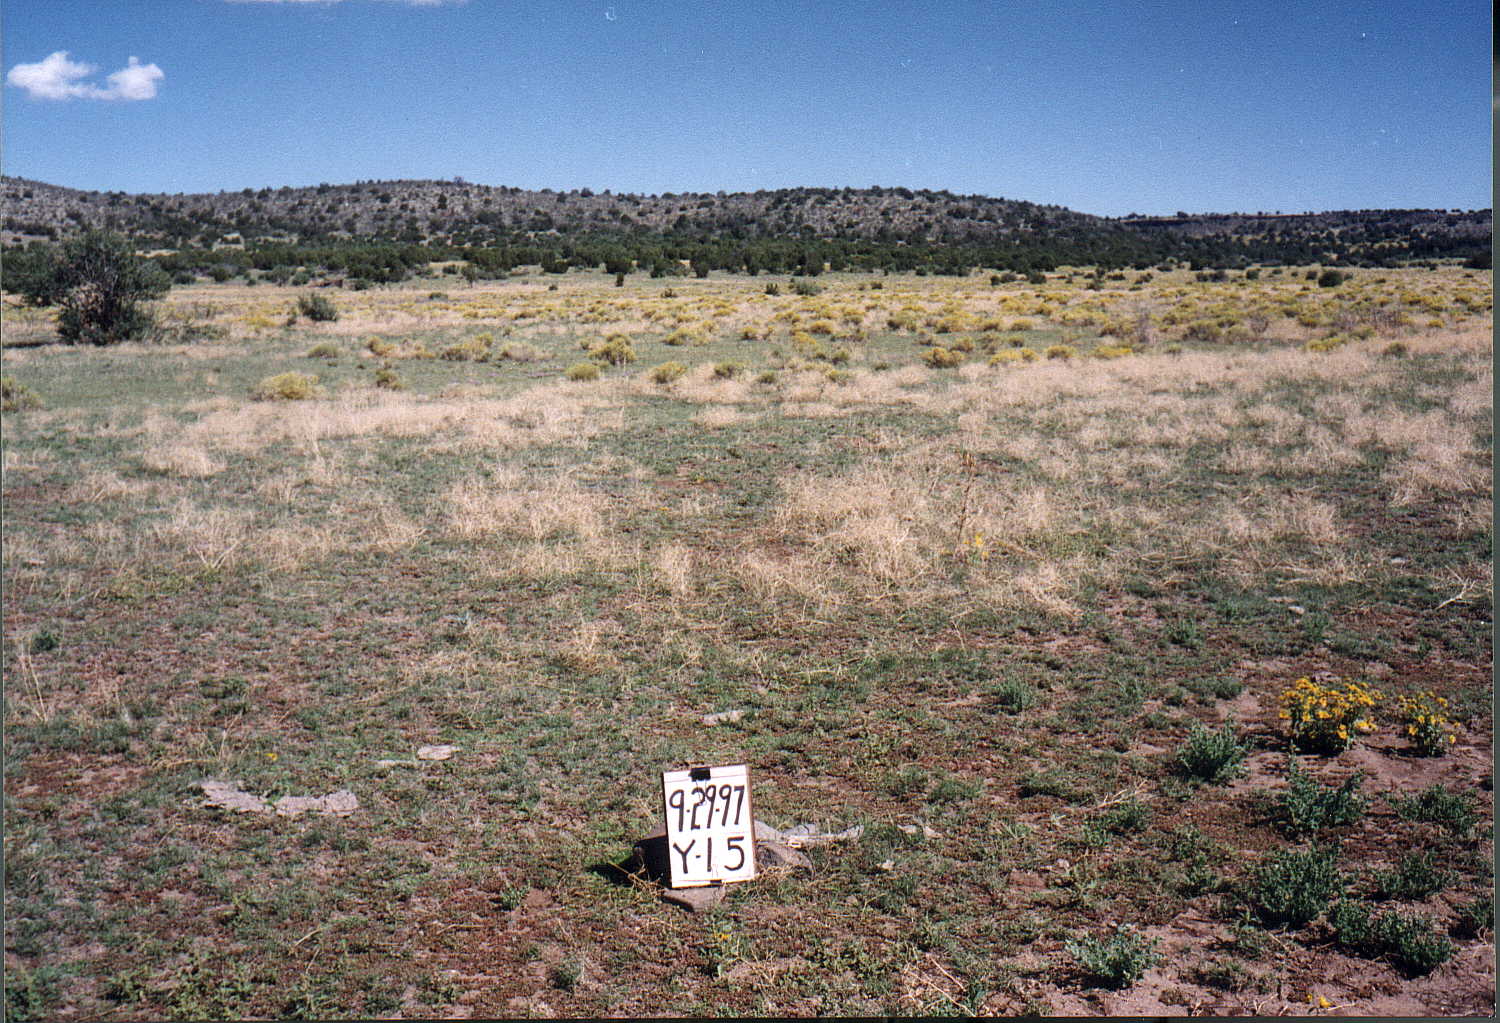 Appearance of Plot Y-15 in Powerline Pasture on September 29, 1997